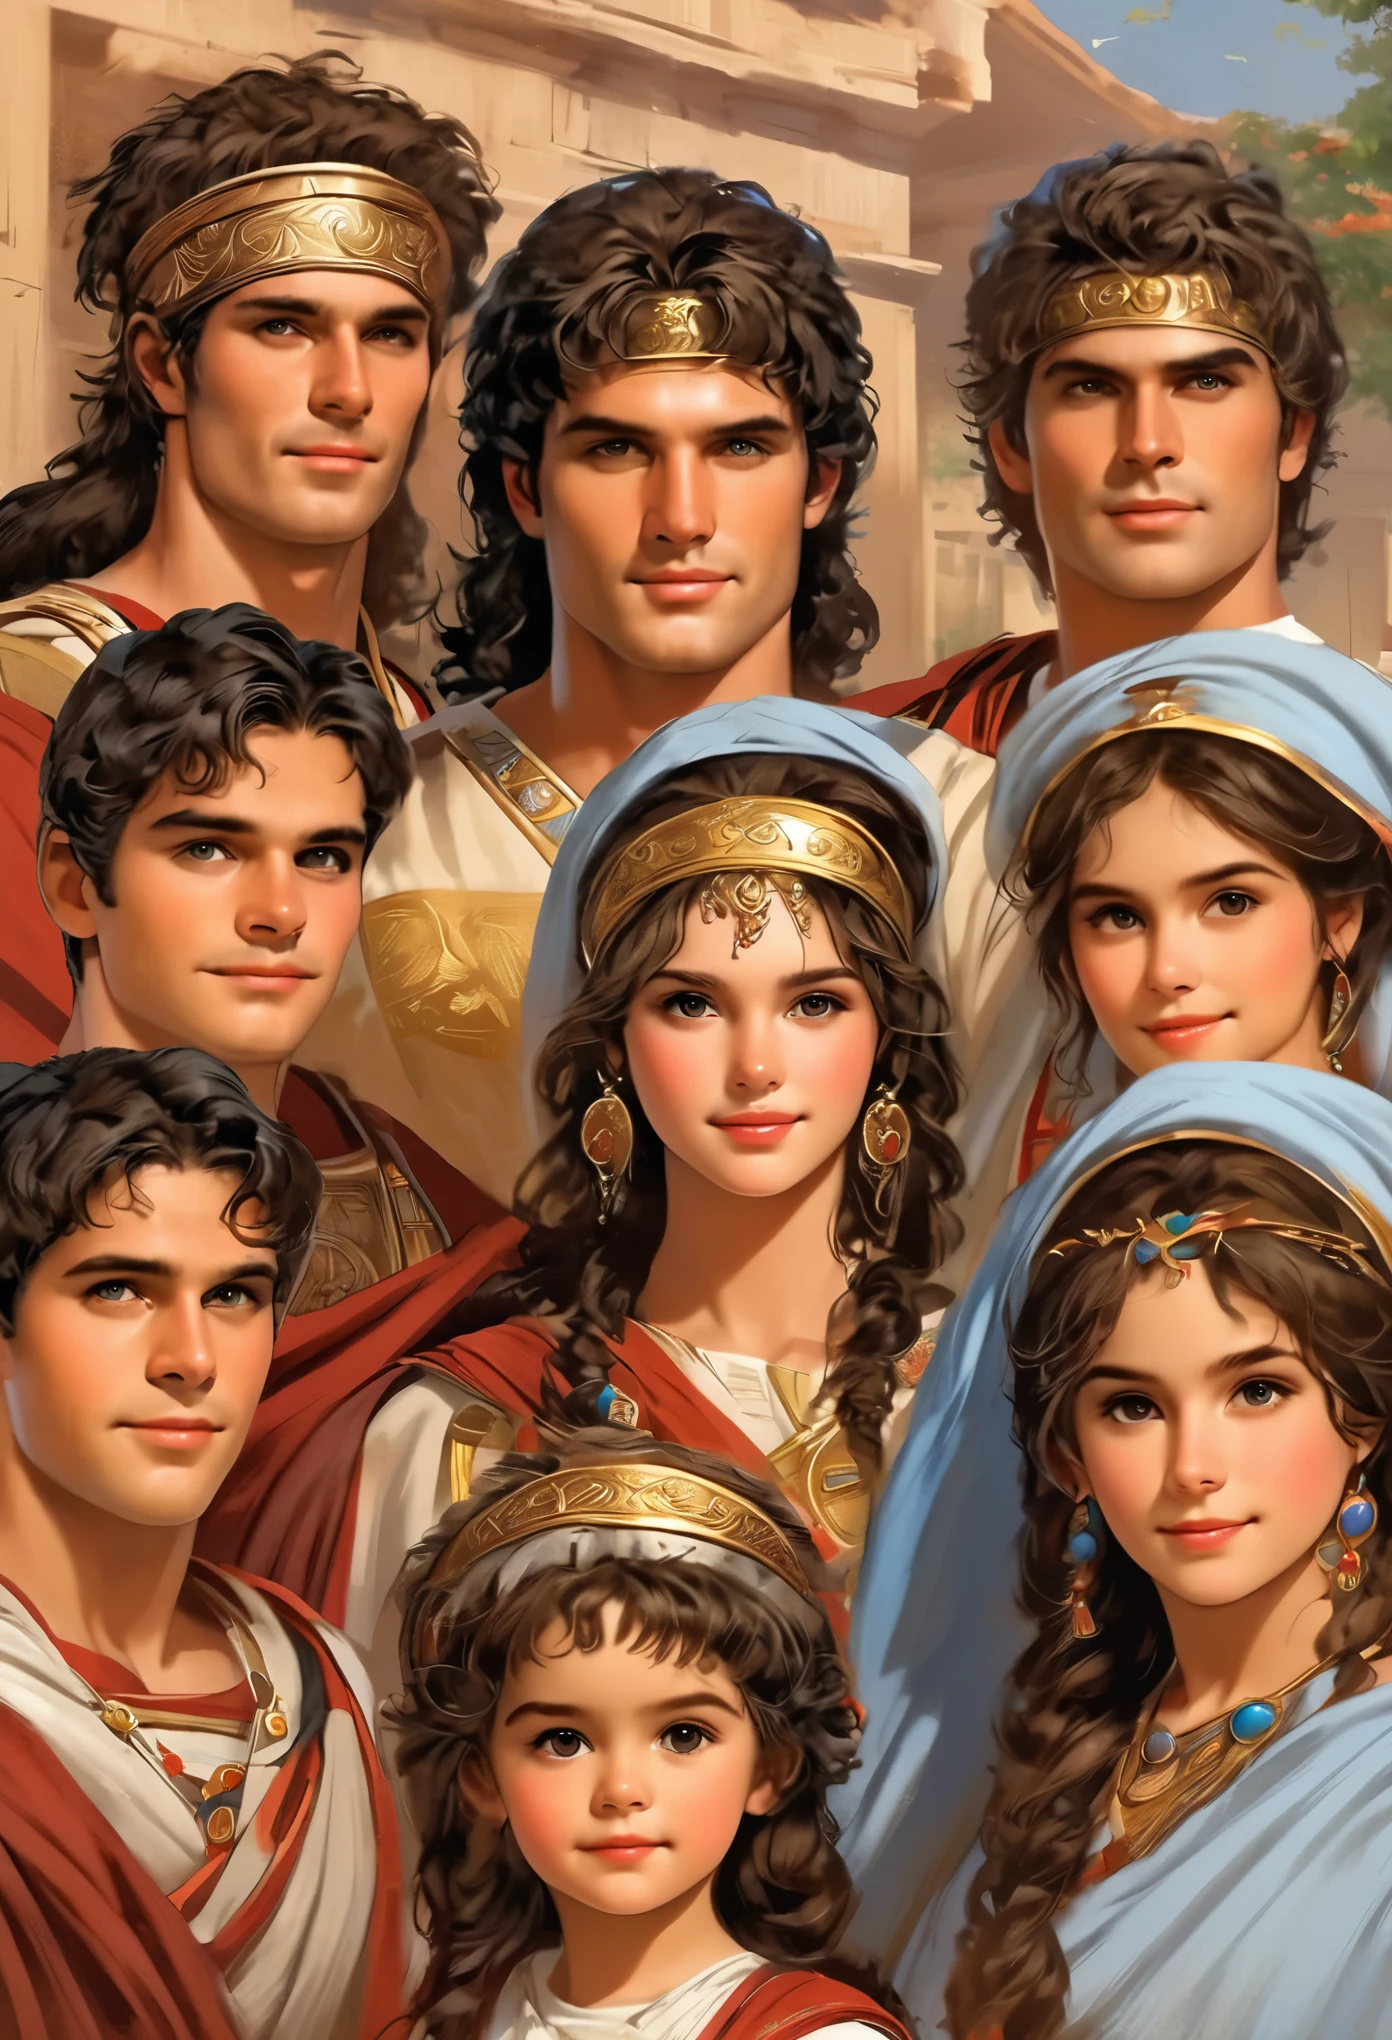 highly detailed very accurate ancient classical historical looking authentic accurate lifelike dignified very good looking beautiful and cute looking roman anime style ancient important extended roman bigger family group males females husband and his wife older also having included young kids servants in home gardens black or brown haired brown eyed darker mediterranean looking very italian full of life and colors multiethnic ancient Rome feeling